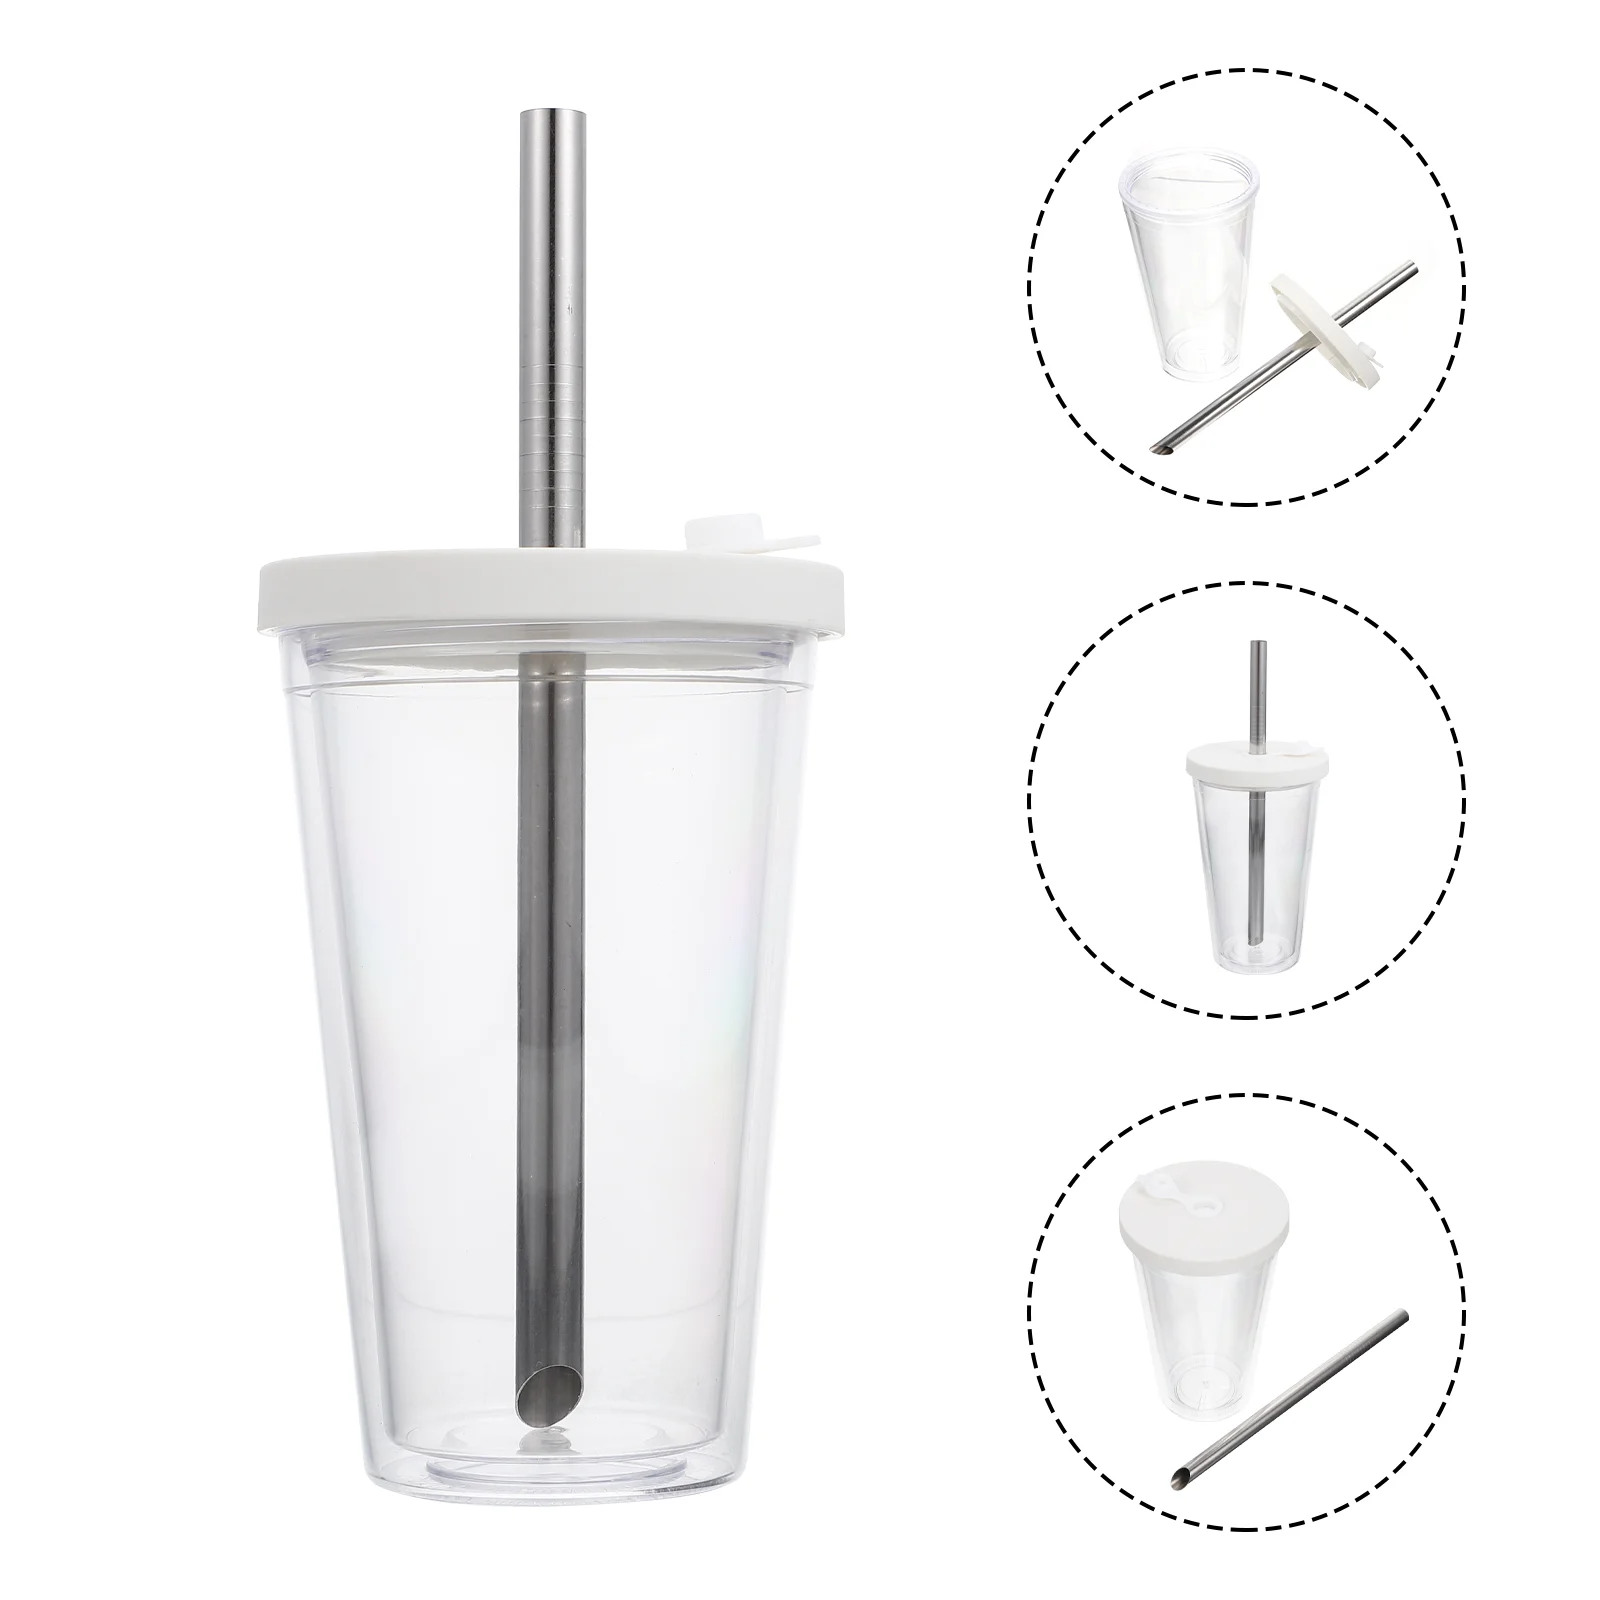 

Cup Tumbler Cups Tea Boba Water Bottle Smoothie Drinking Straw Bubble Reusable Wide Mouthiced Beverage Sippy Insulated Coffee